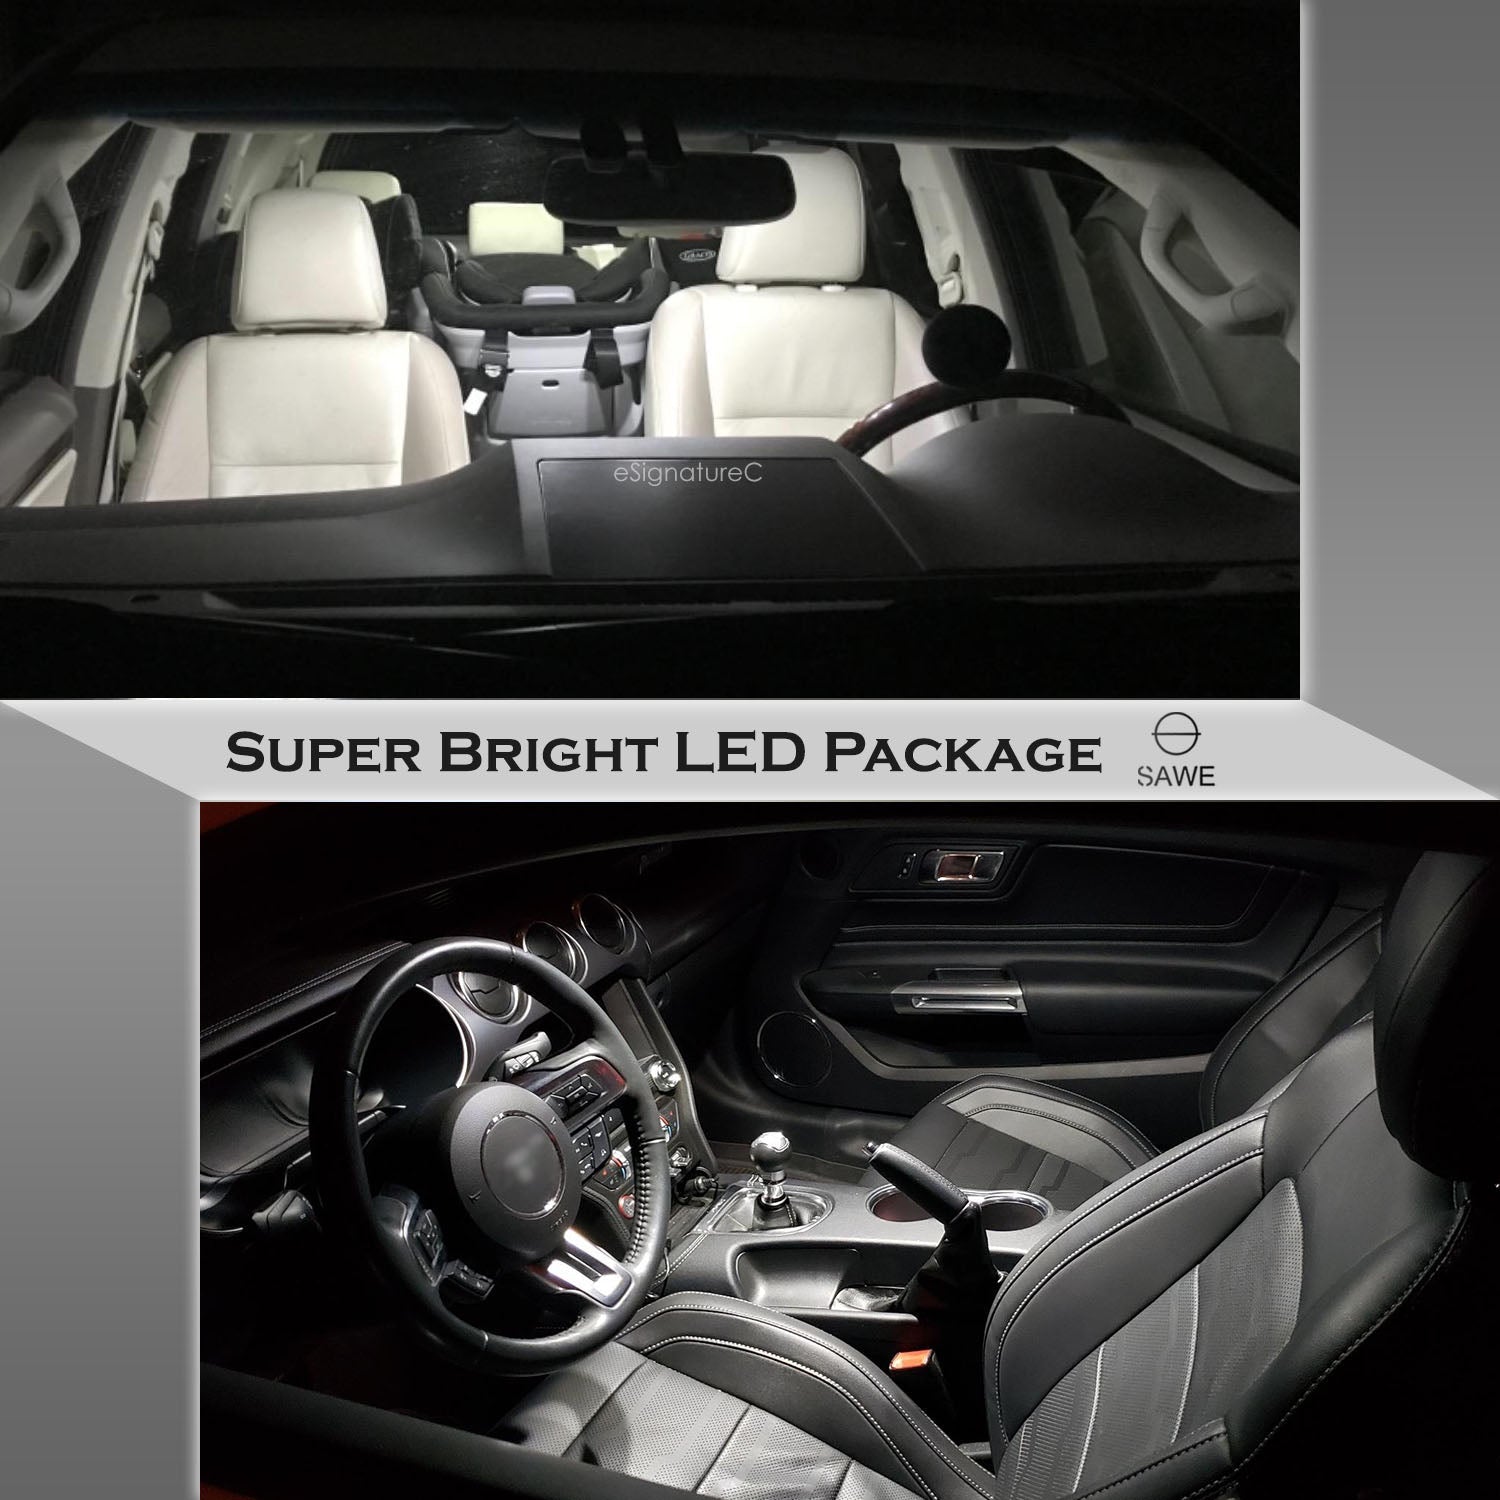 For Toyota Corolla Interior LED Lights - Dome & Map Lights Package Kit for 1993 - 1997 - White